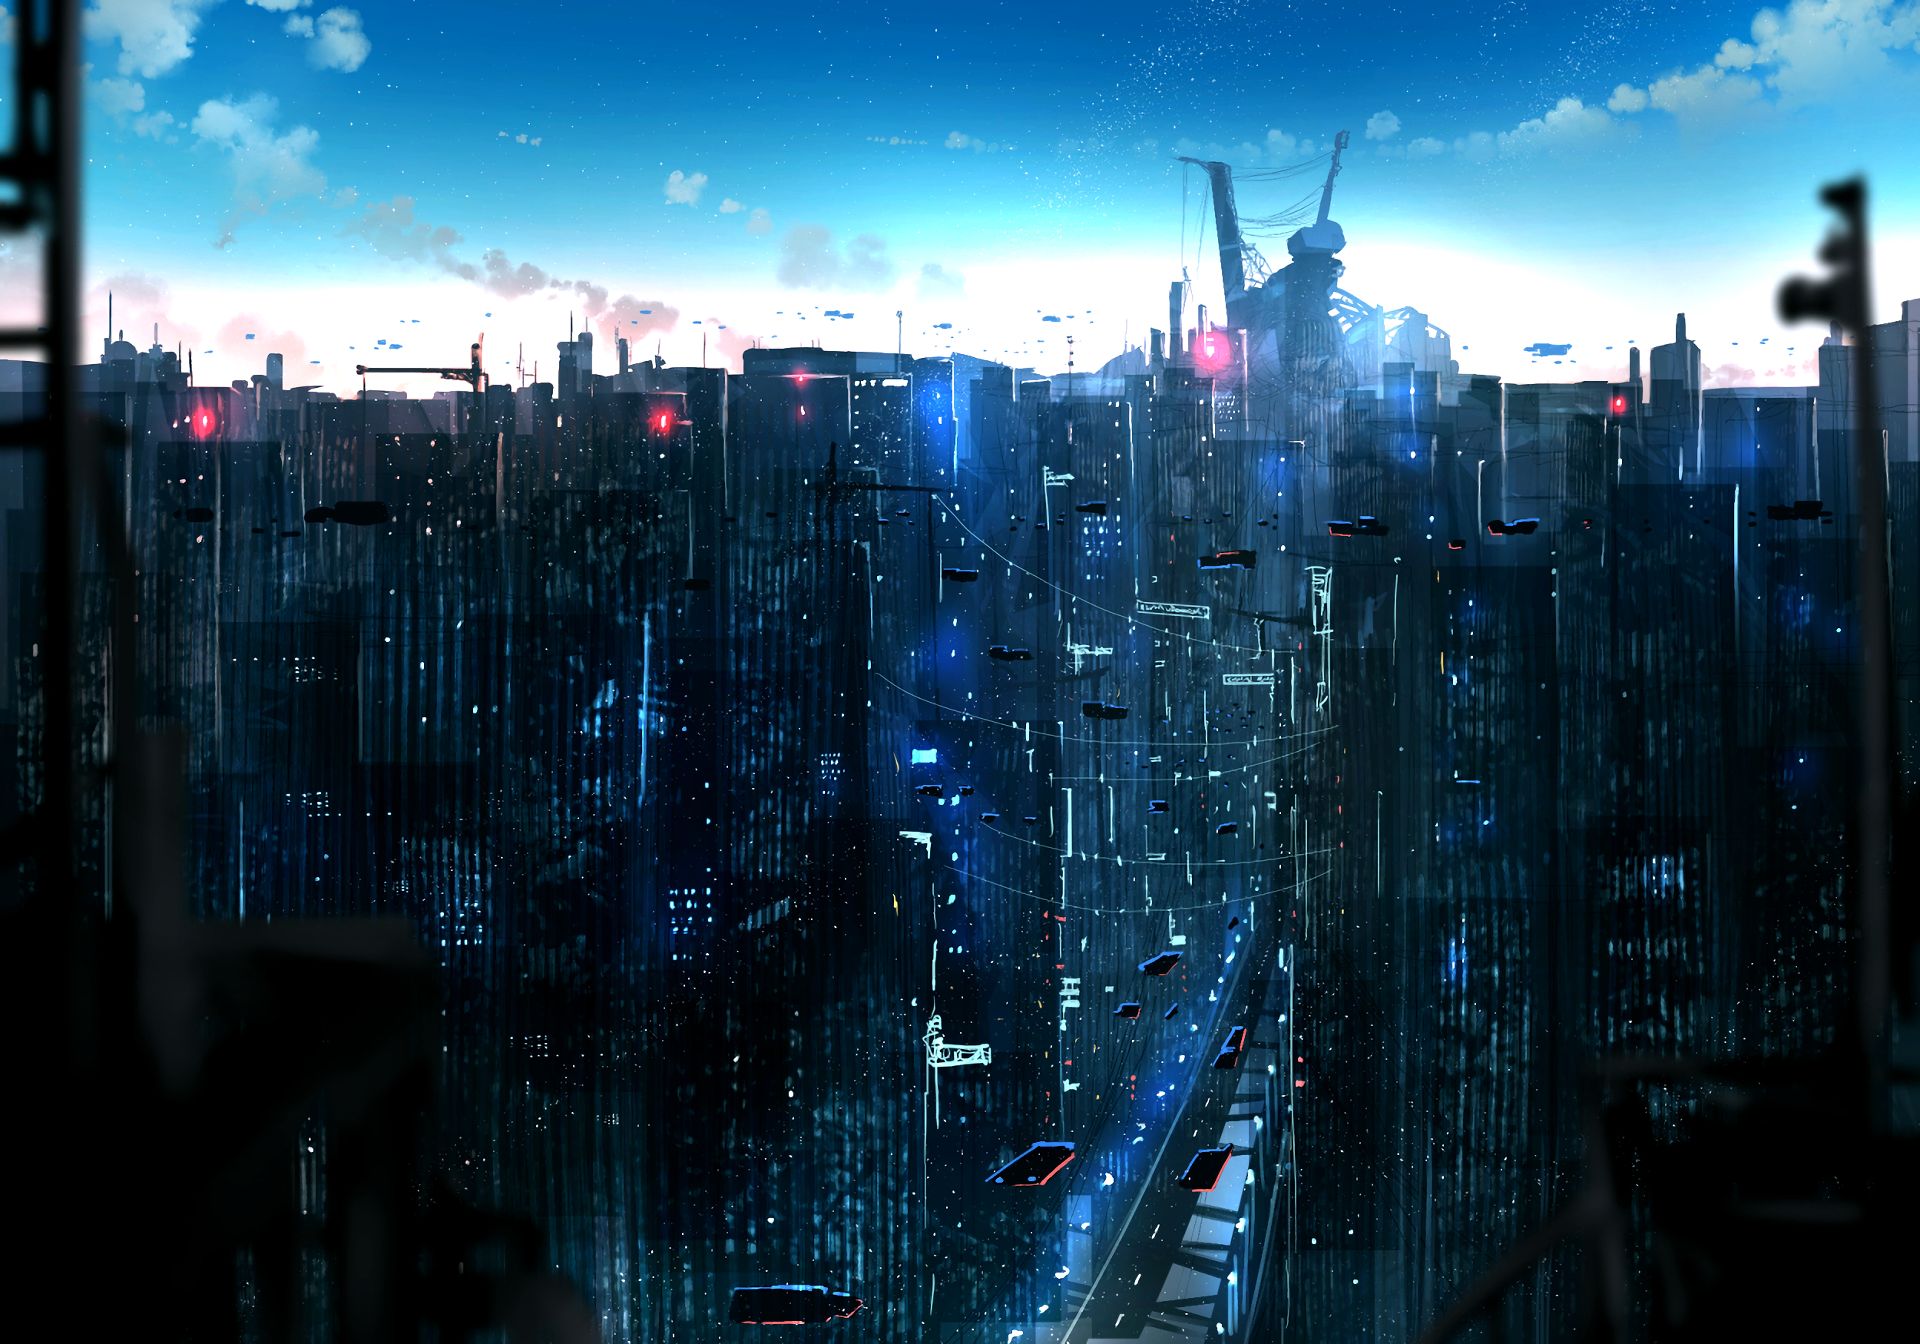 Wallpaper  cityscape anime building cathedral metropolis Gothic  architecture screenshot 3100x2046  ennes  285536  HD Wallpapers   WallHere